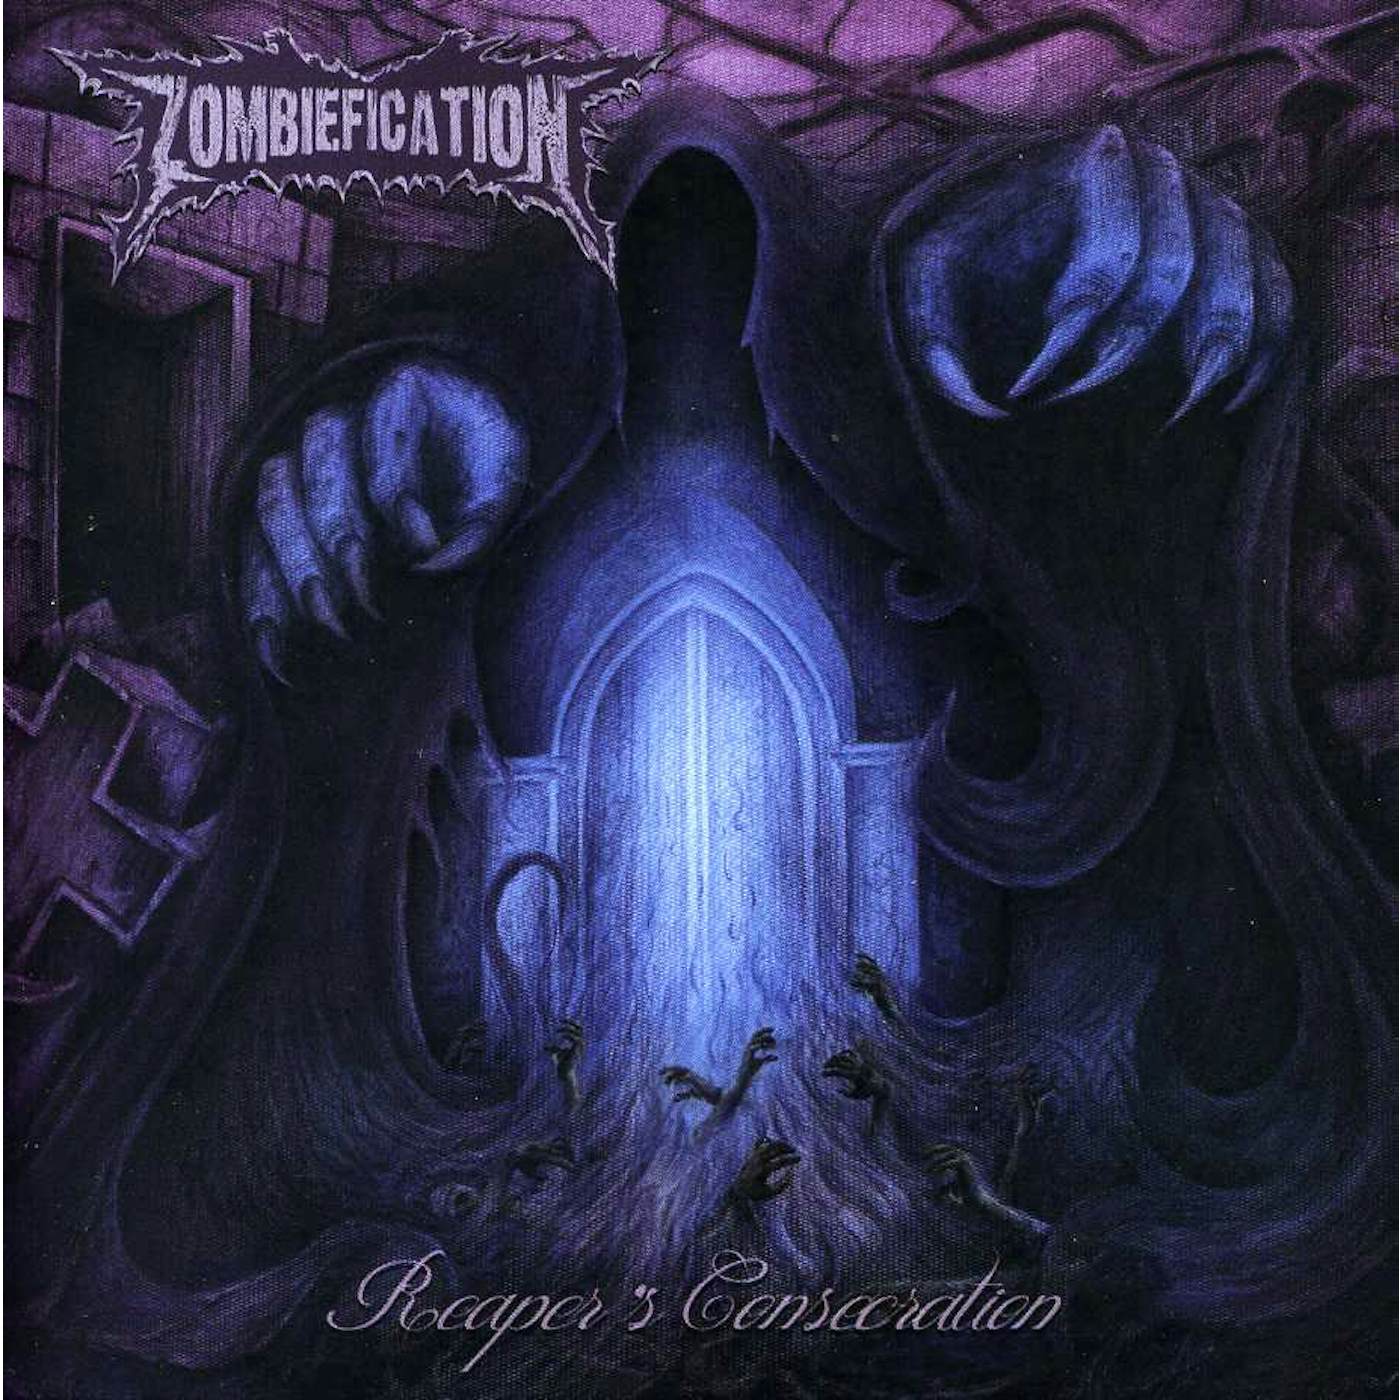 Zombiefication REAPER'S CONSECRATION CD